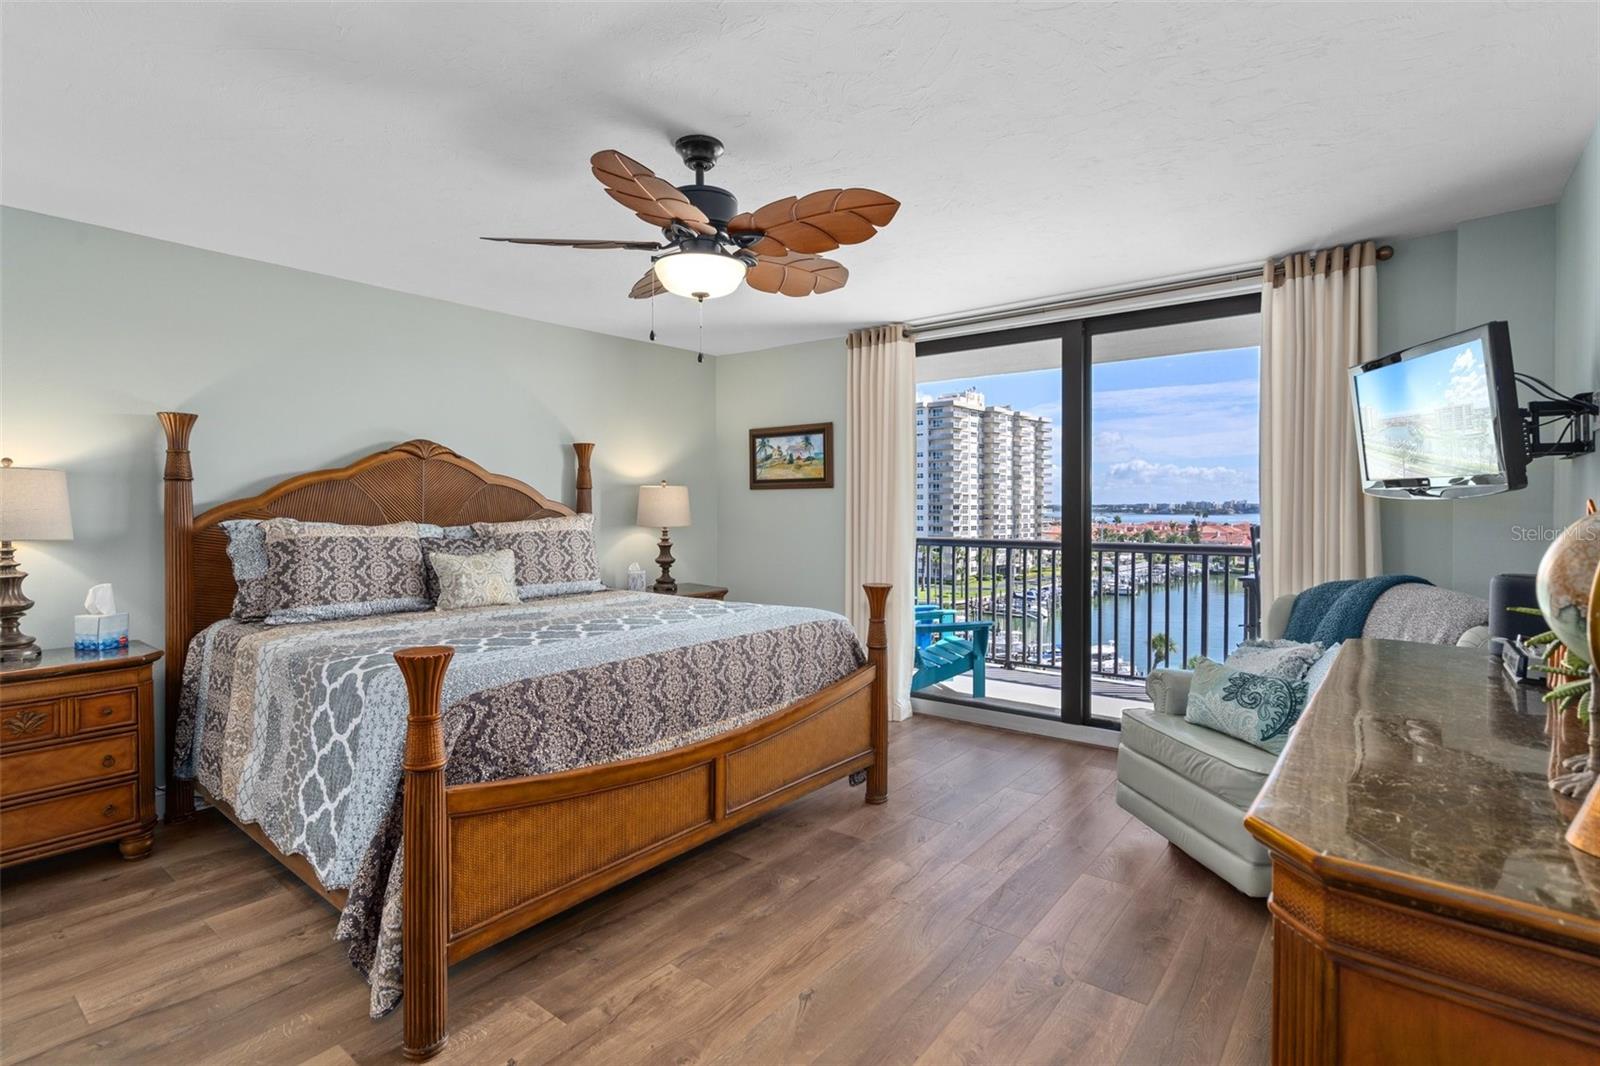 Primary bedroom with dreamy views of the Clearwater Harbor/Intracoastal waterway.